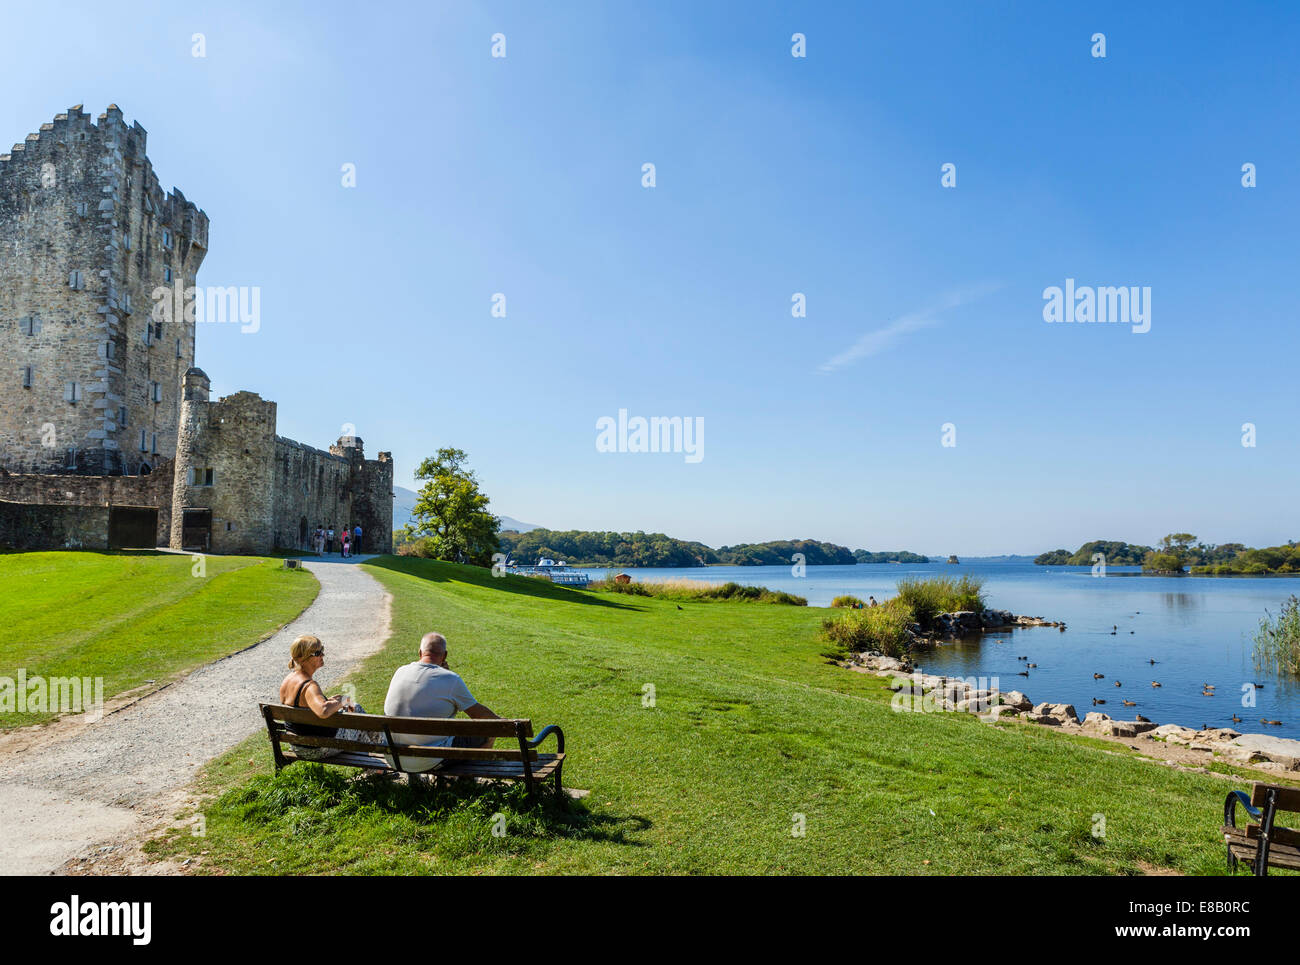 Couple on bench in front of Ross Castle on shores of Lough Lean, Killarney National Park, County Kerry, Republic of Ireland Stock Photo